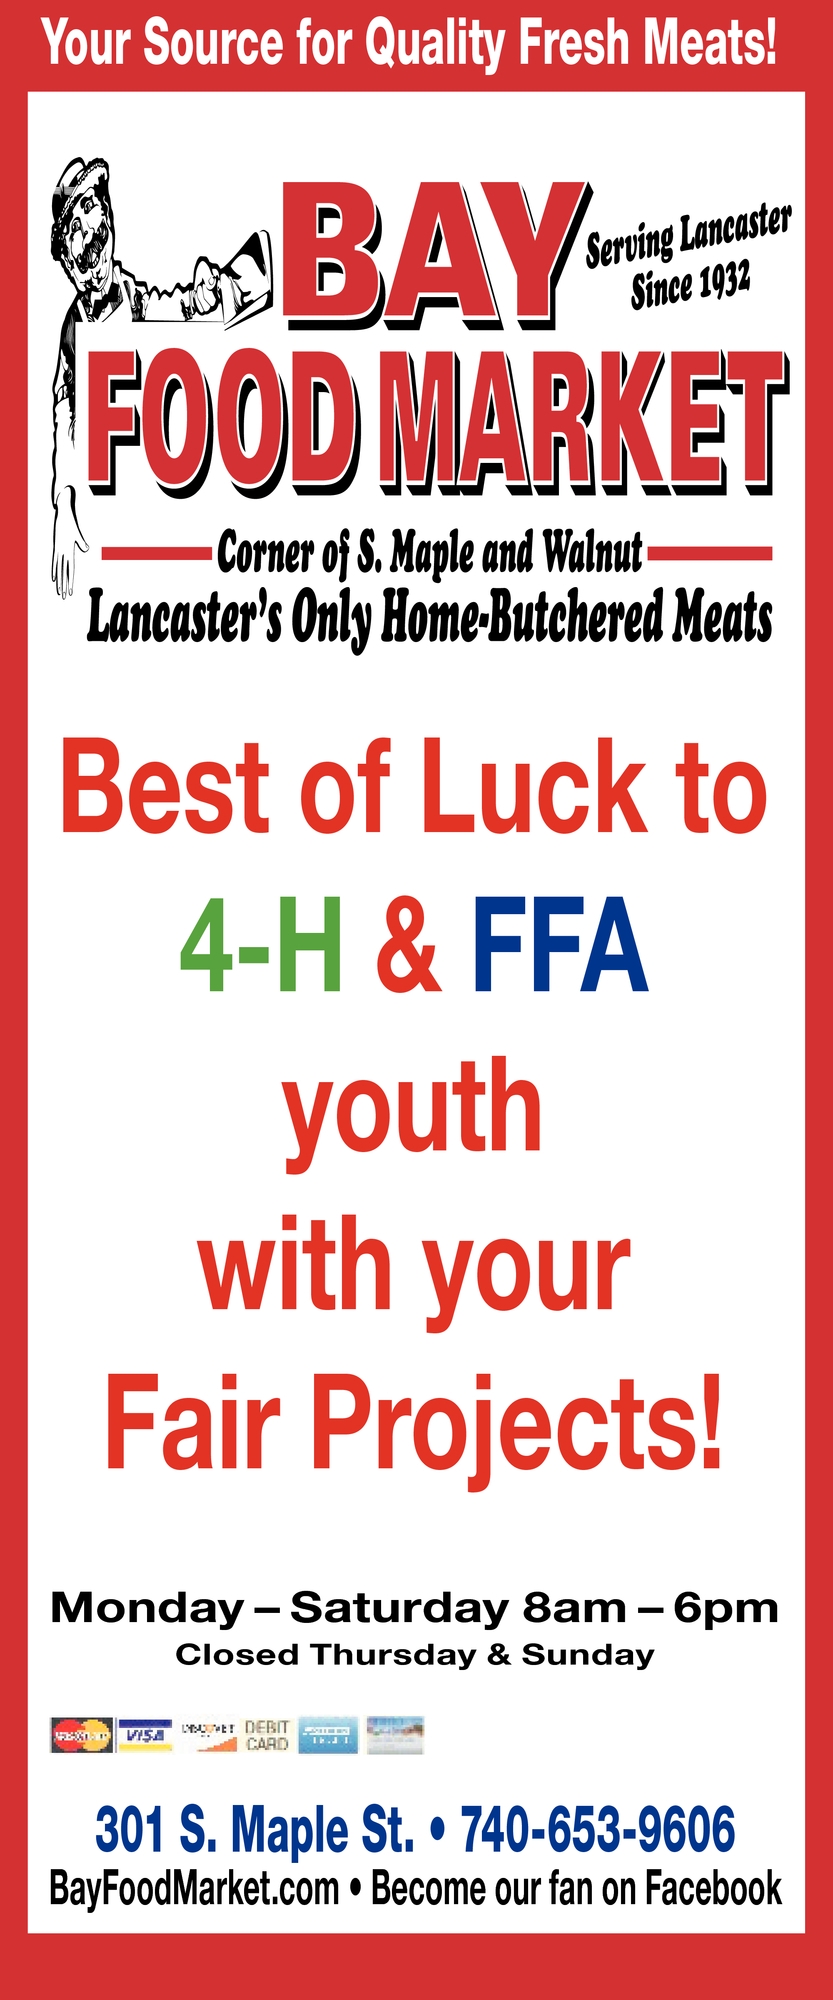 Your Source For Quality Fresh Meats!